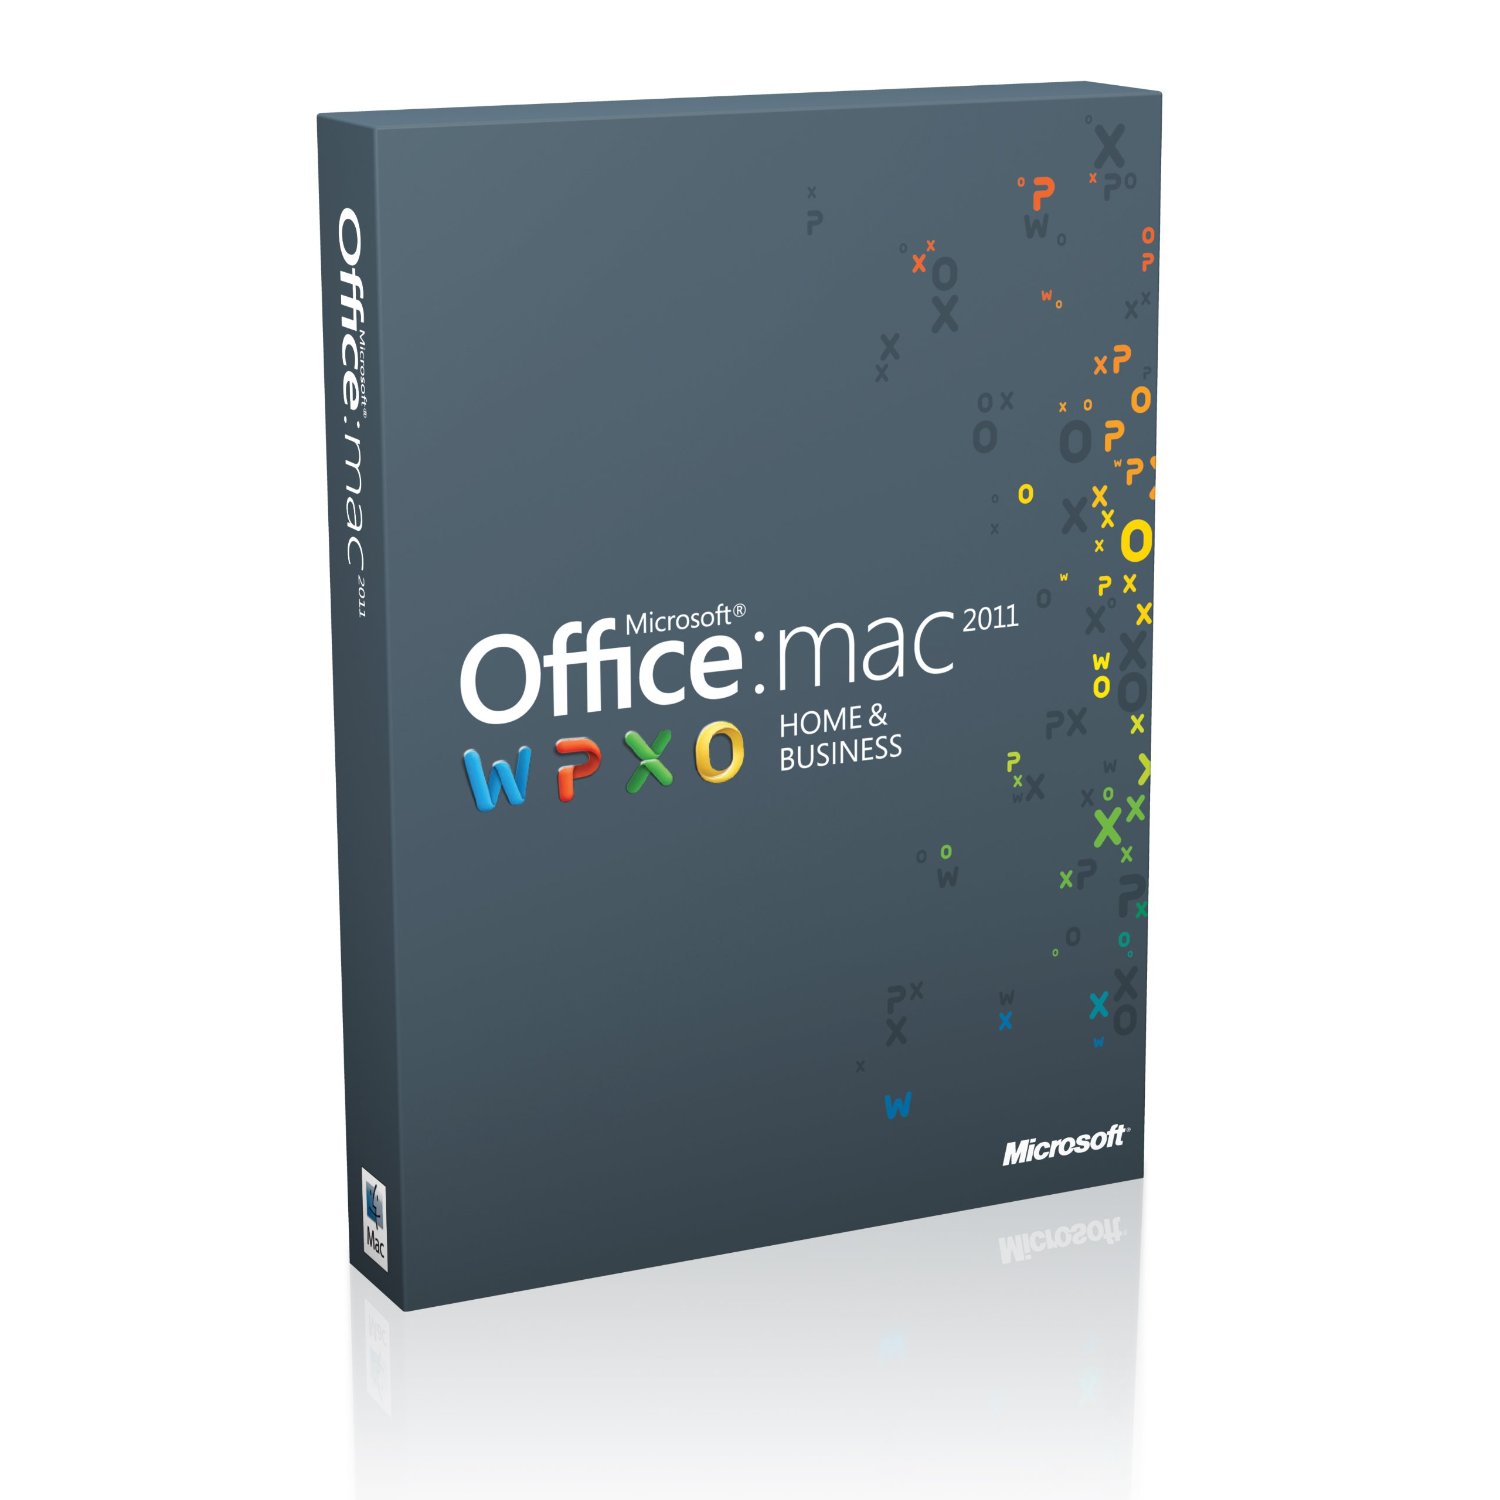 what is the latest version of microsoft office for mac 2011